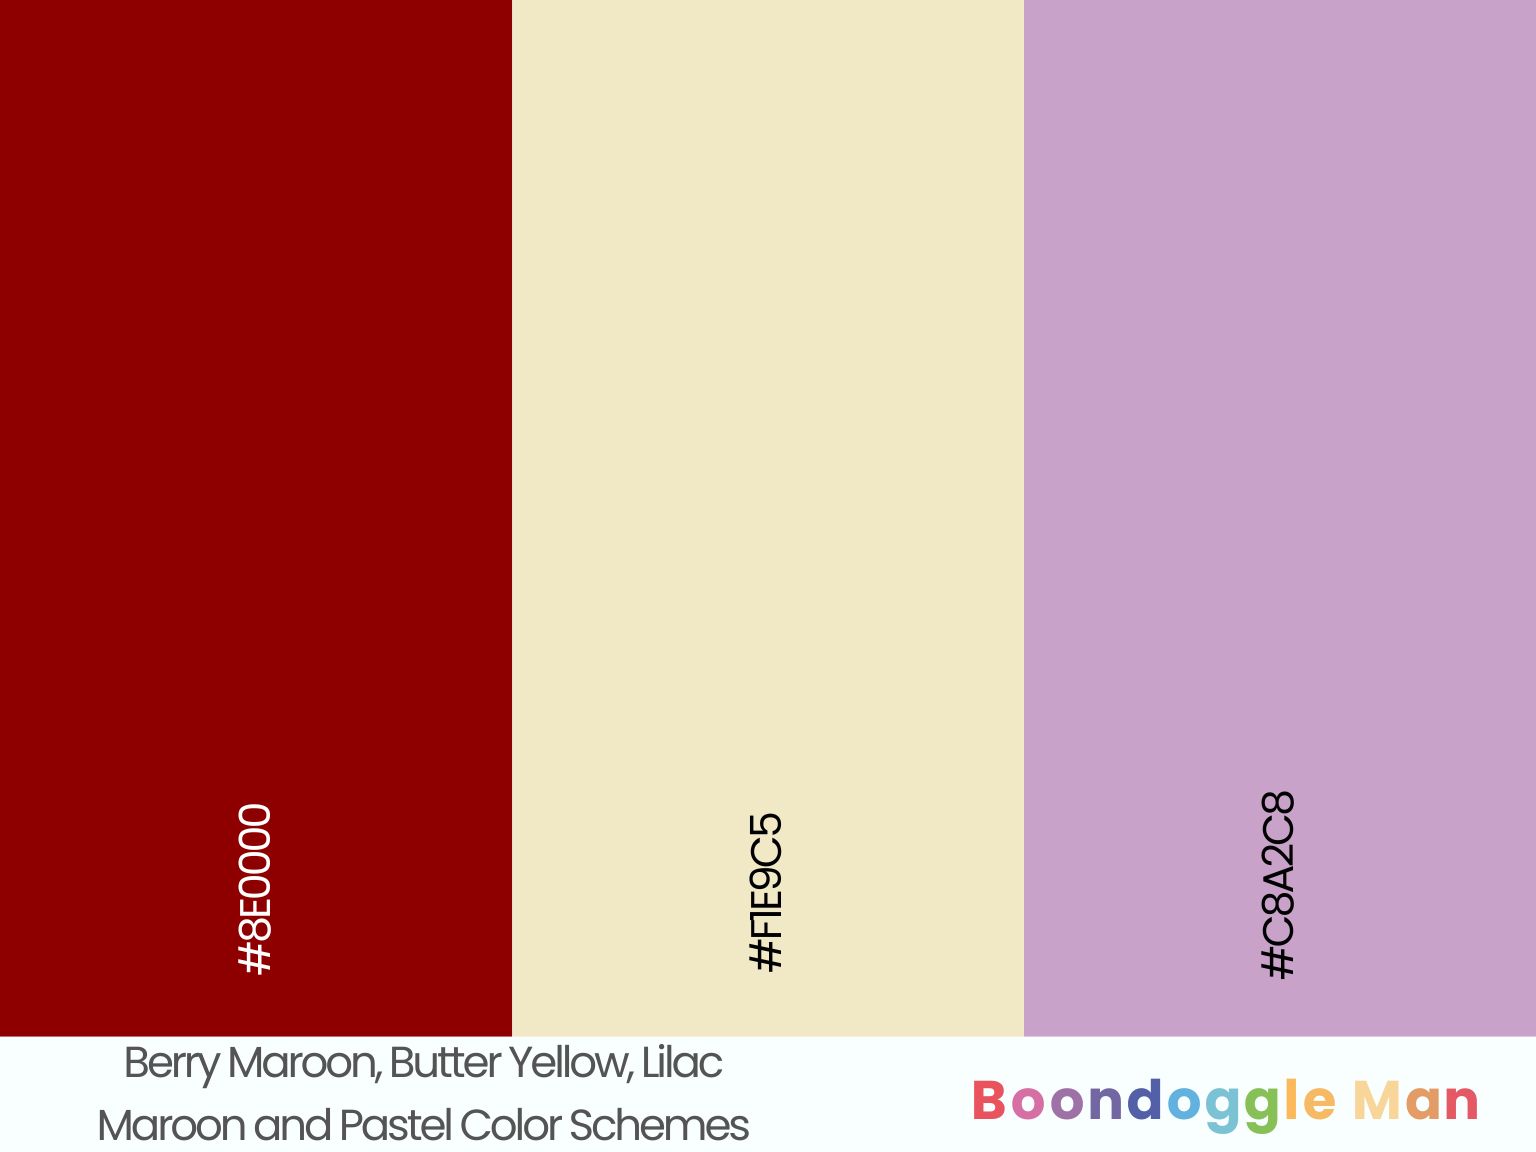 Berry Maroon, Butter Yellow, Lilac